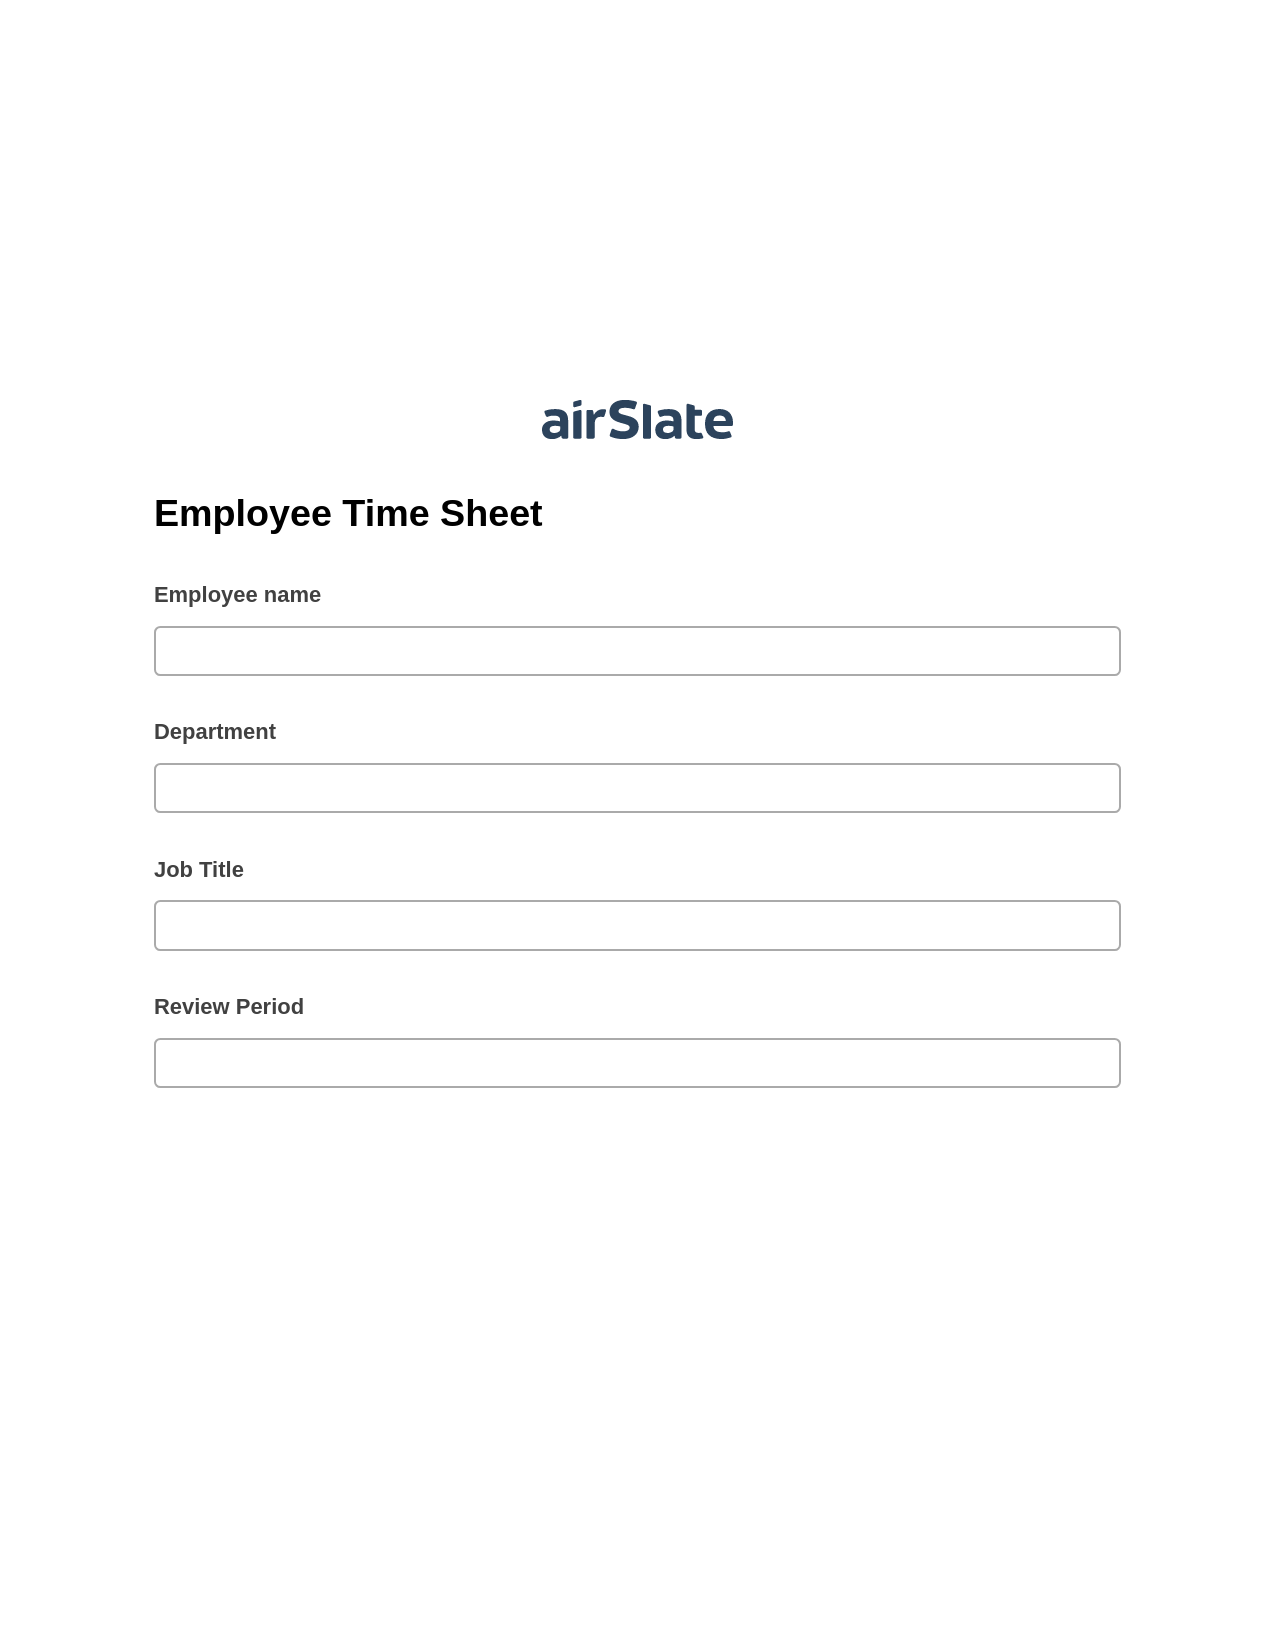 Employee Time Sheet Pre-fill from Salesforce Records with SOQL Bot, Update MS Dynamics 365 Record Bot, Slack Notification Postfinish Bot